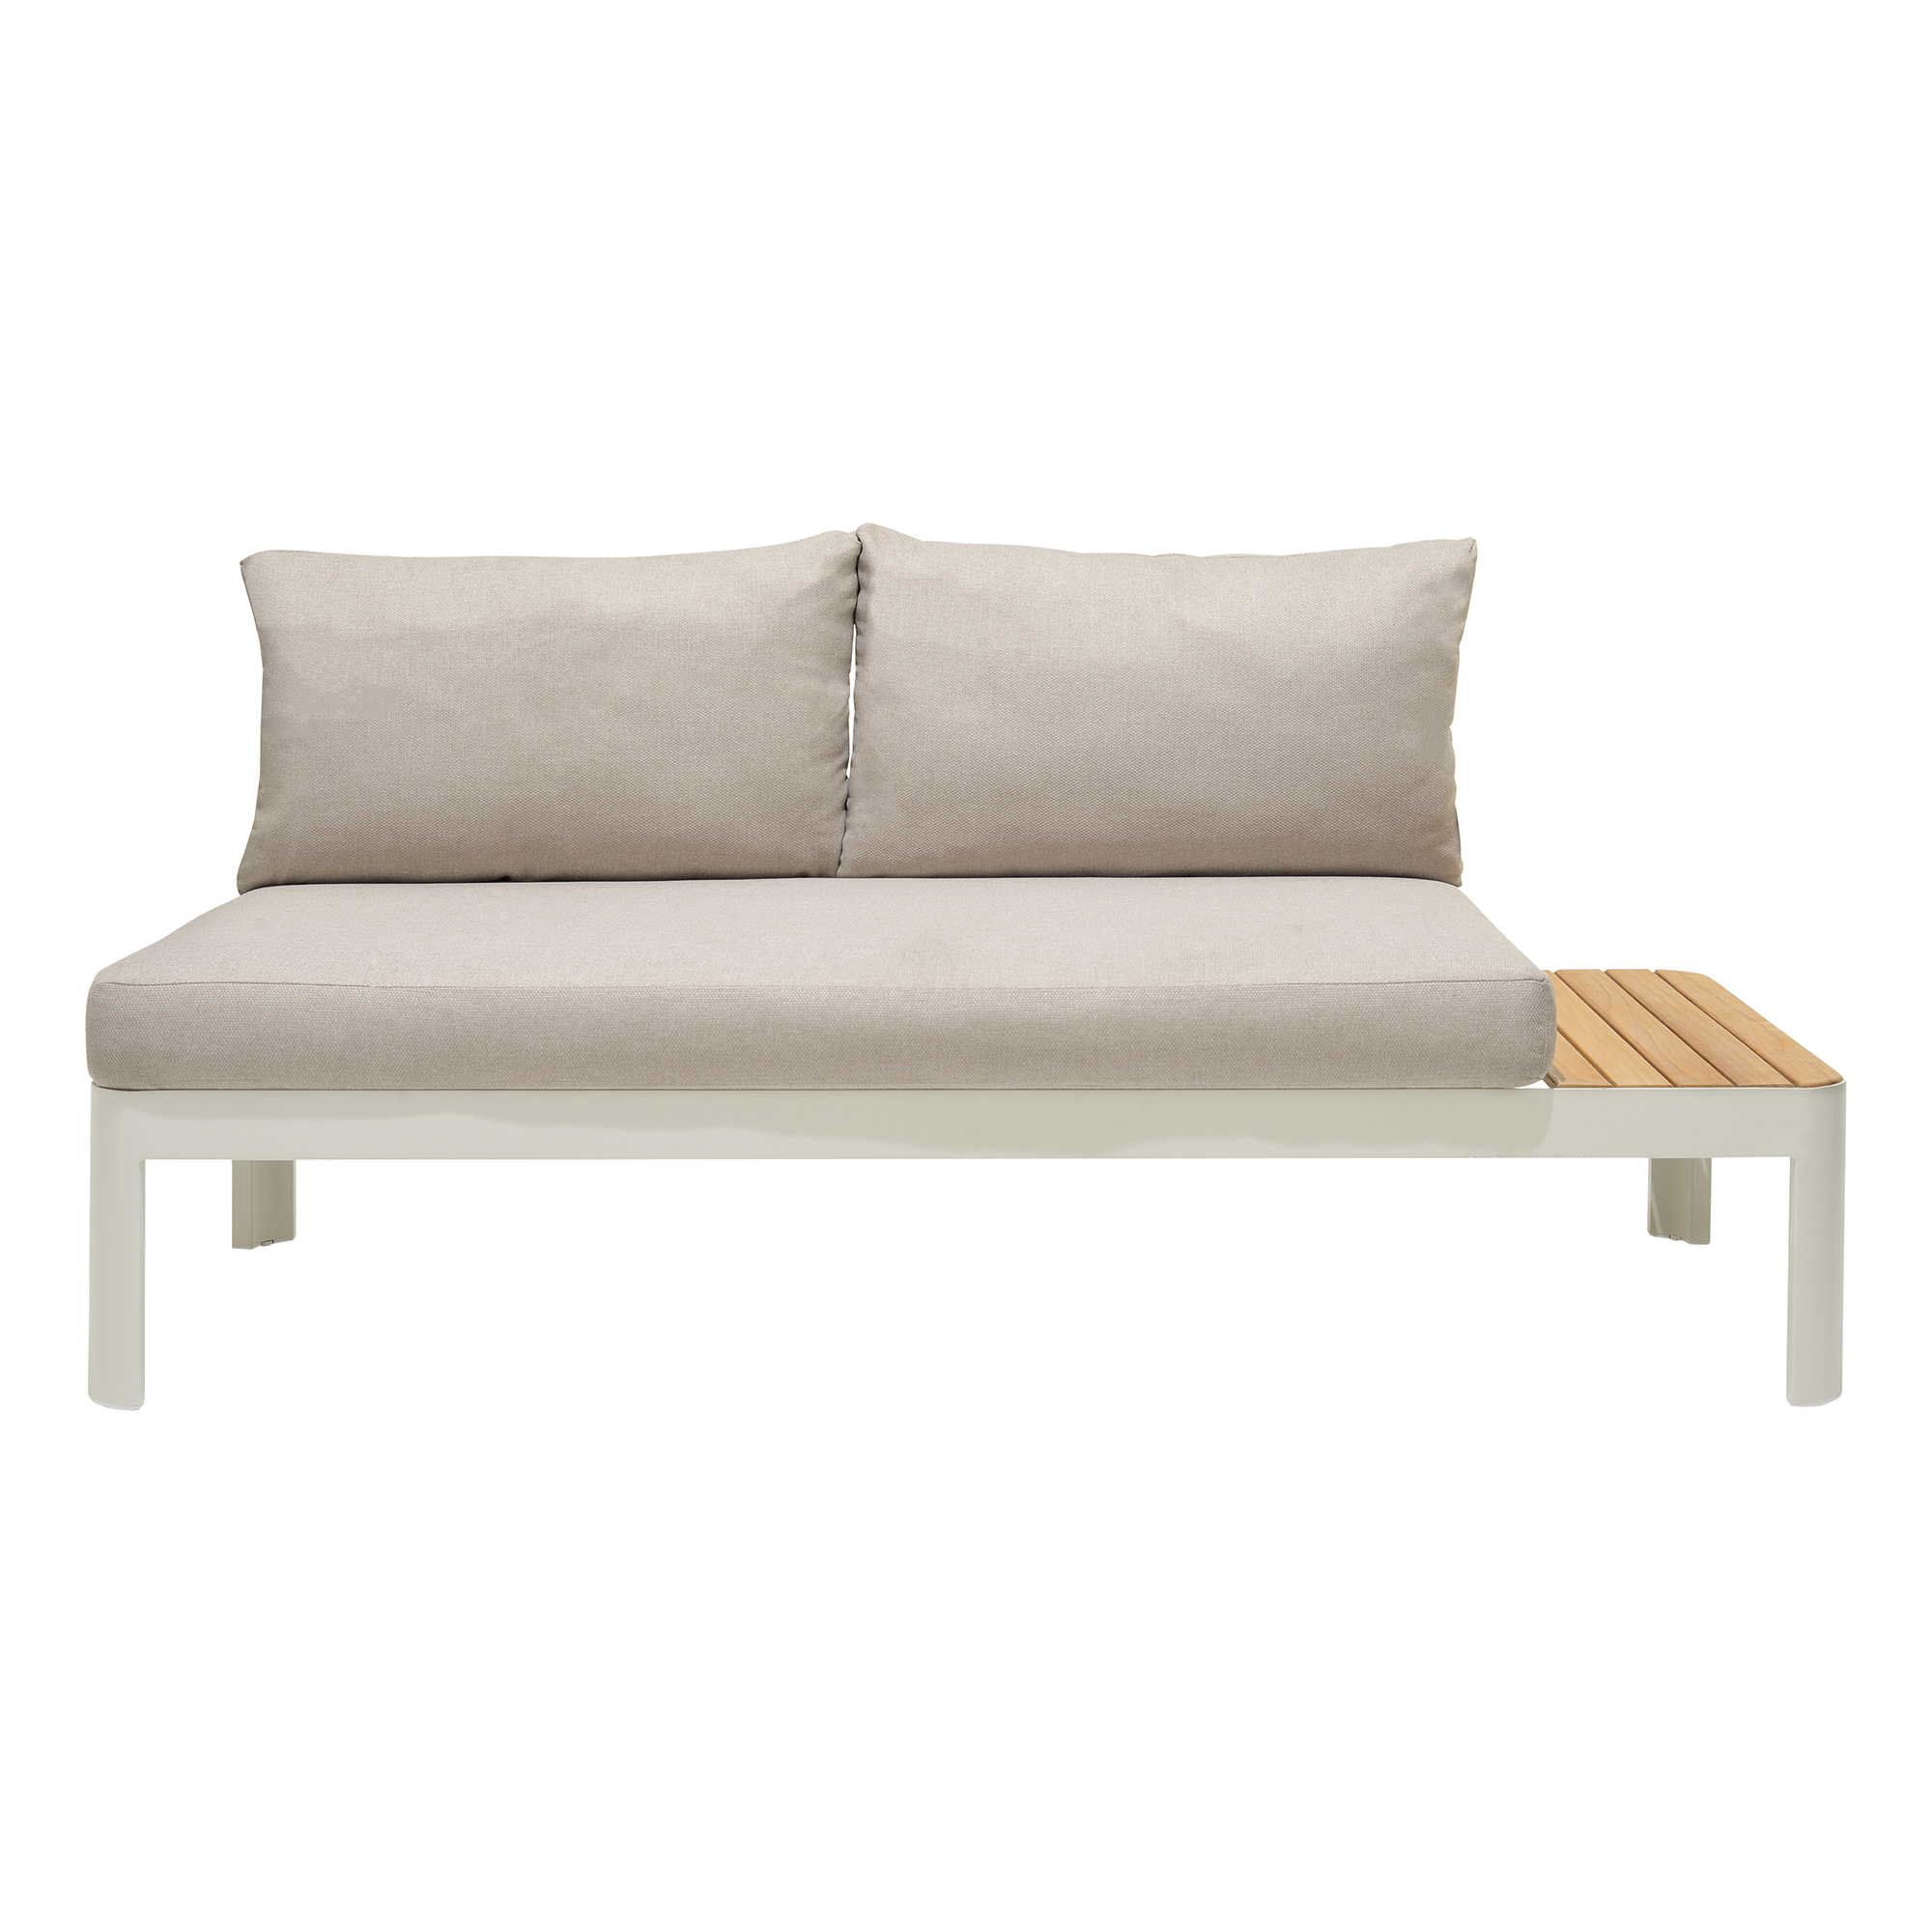 Portals Outdoor 2 Piece Sofa Set in Light Matte Sand Finish with Beige Cushions and Natural Teak Wood Accent - image 5 of 6